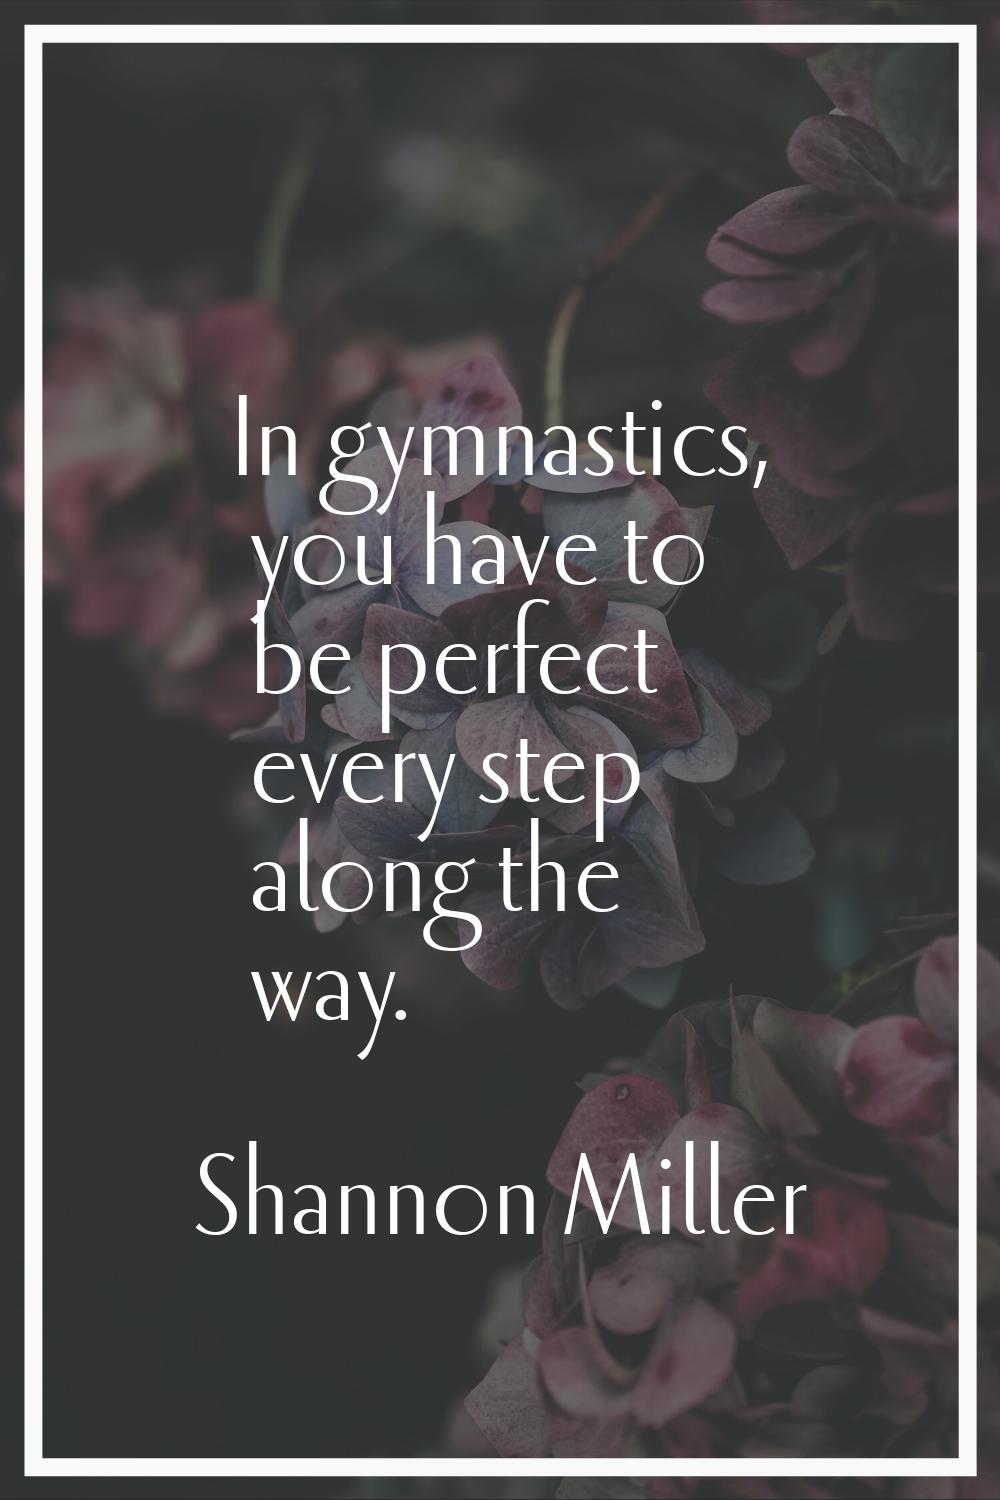 In gymnastics, you have to be perfect every step along the way.